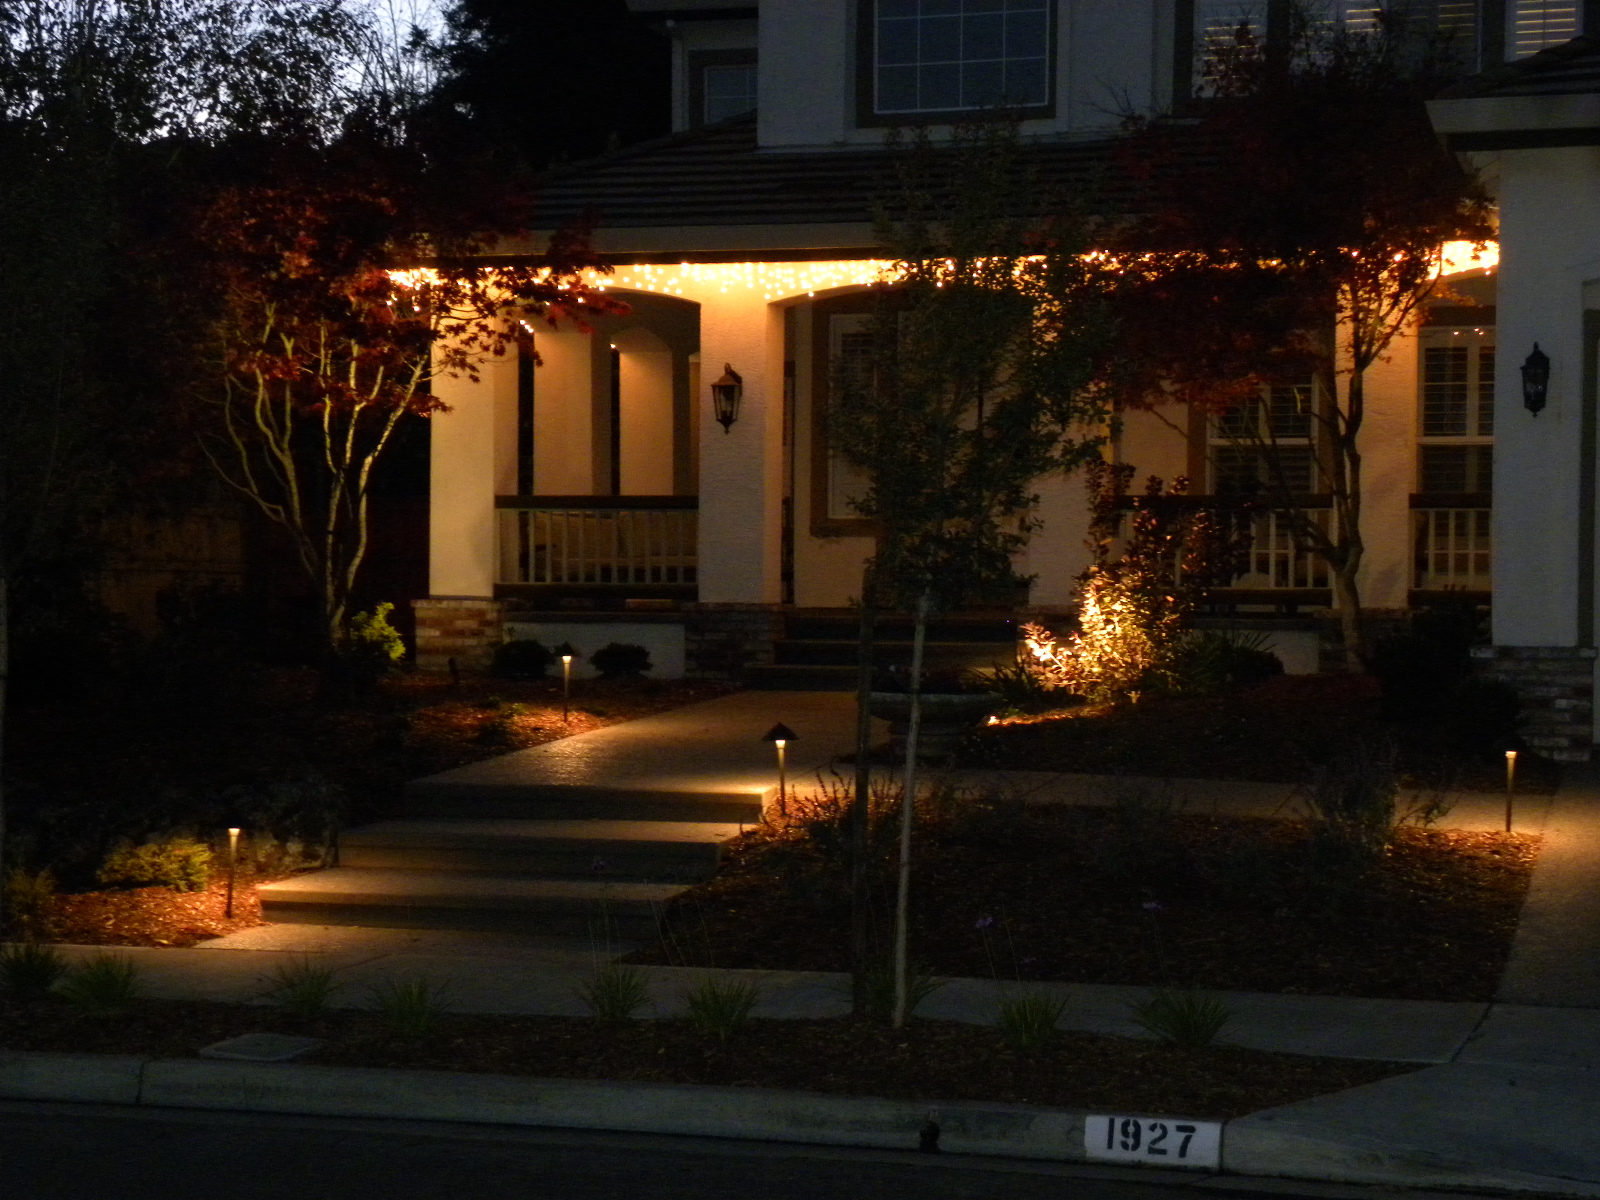 Highlighting the Evening Landscape with Low Voltage Lighting